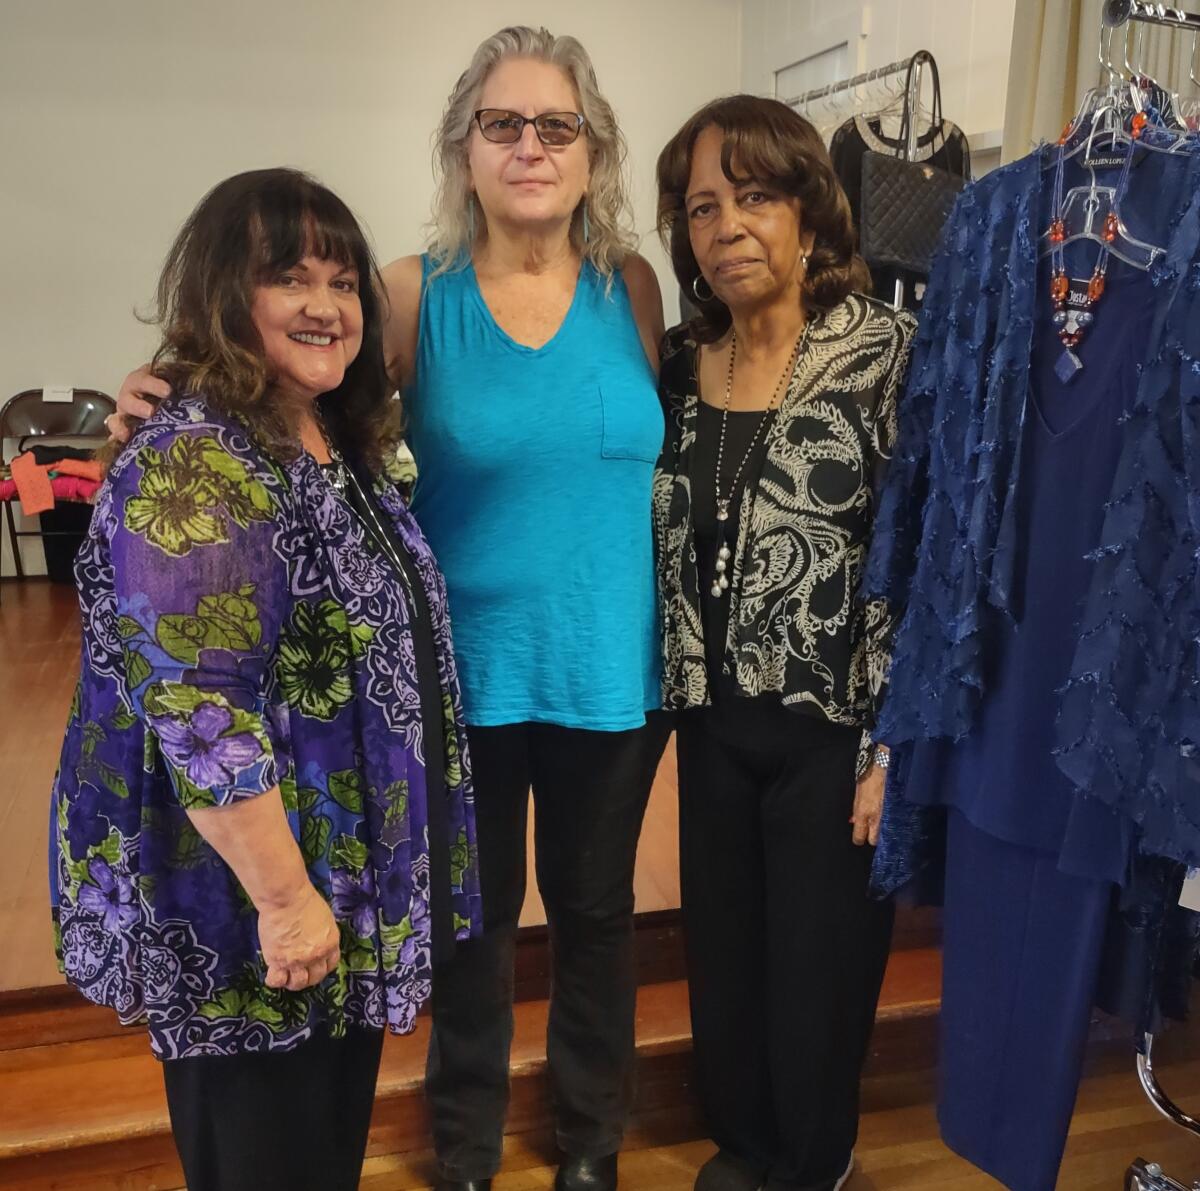 Sales associates at Glamor Girlz Boutique are, from left, Monica Zech, Denise Rich and boutique owner Peggy Harris.